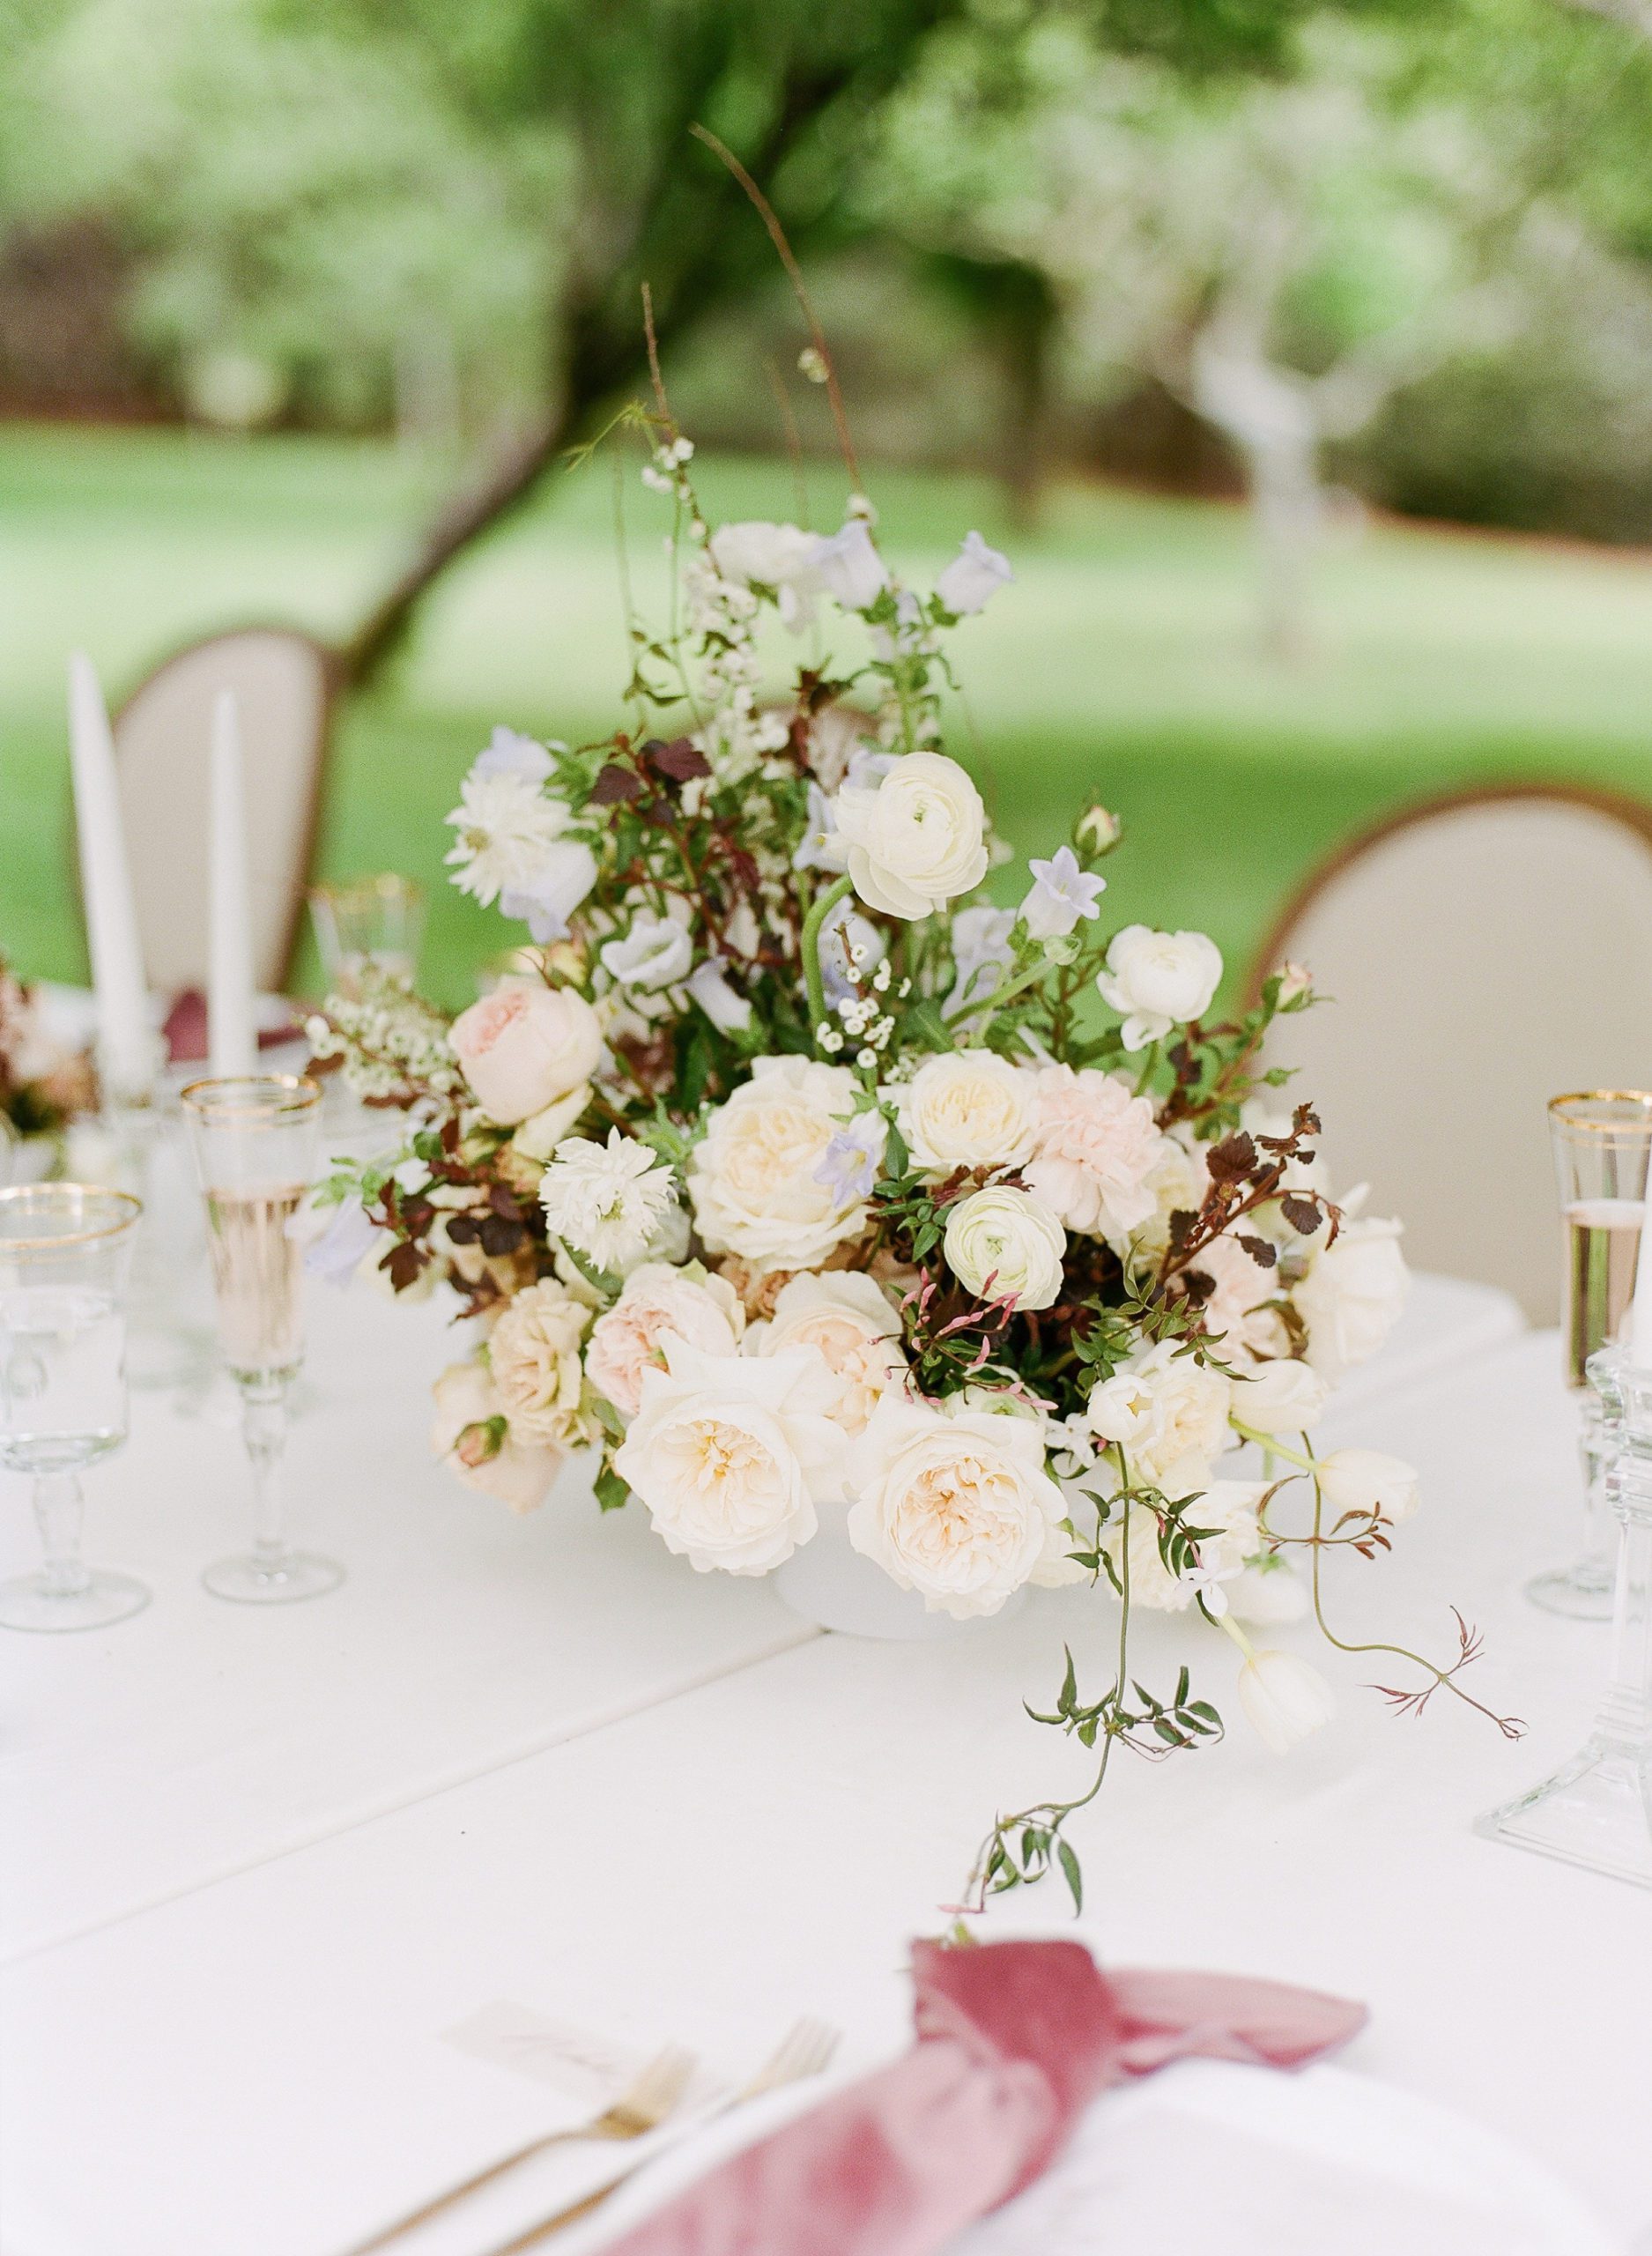 Wedding Reception Table Centerpiece with White Roses Photo